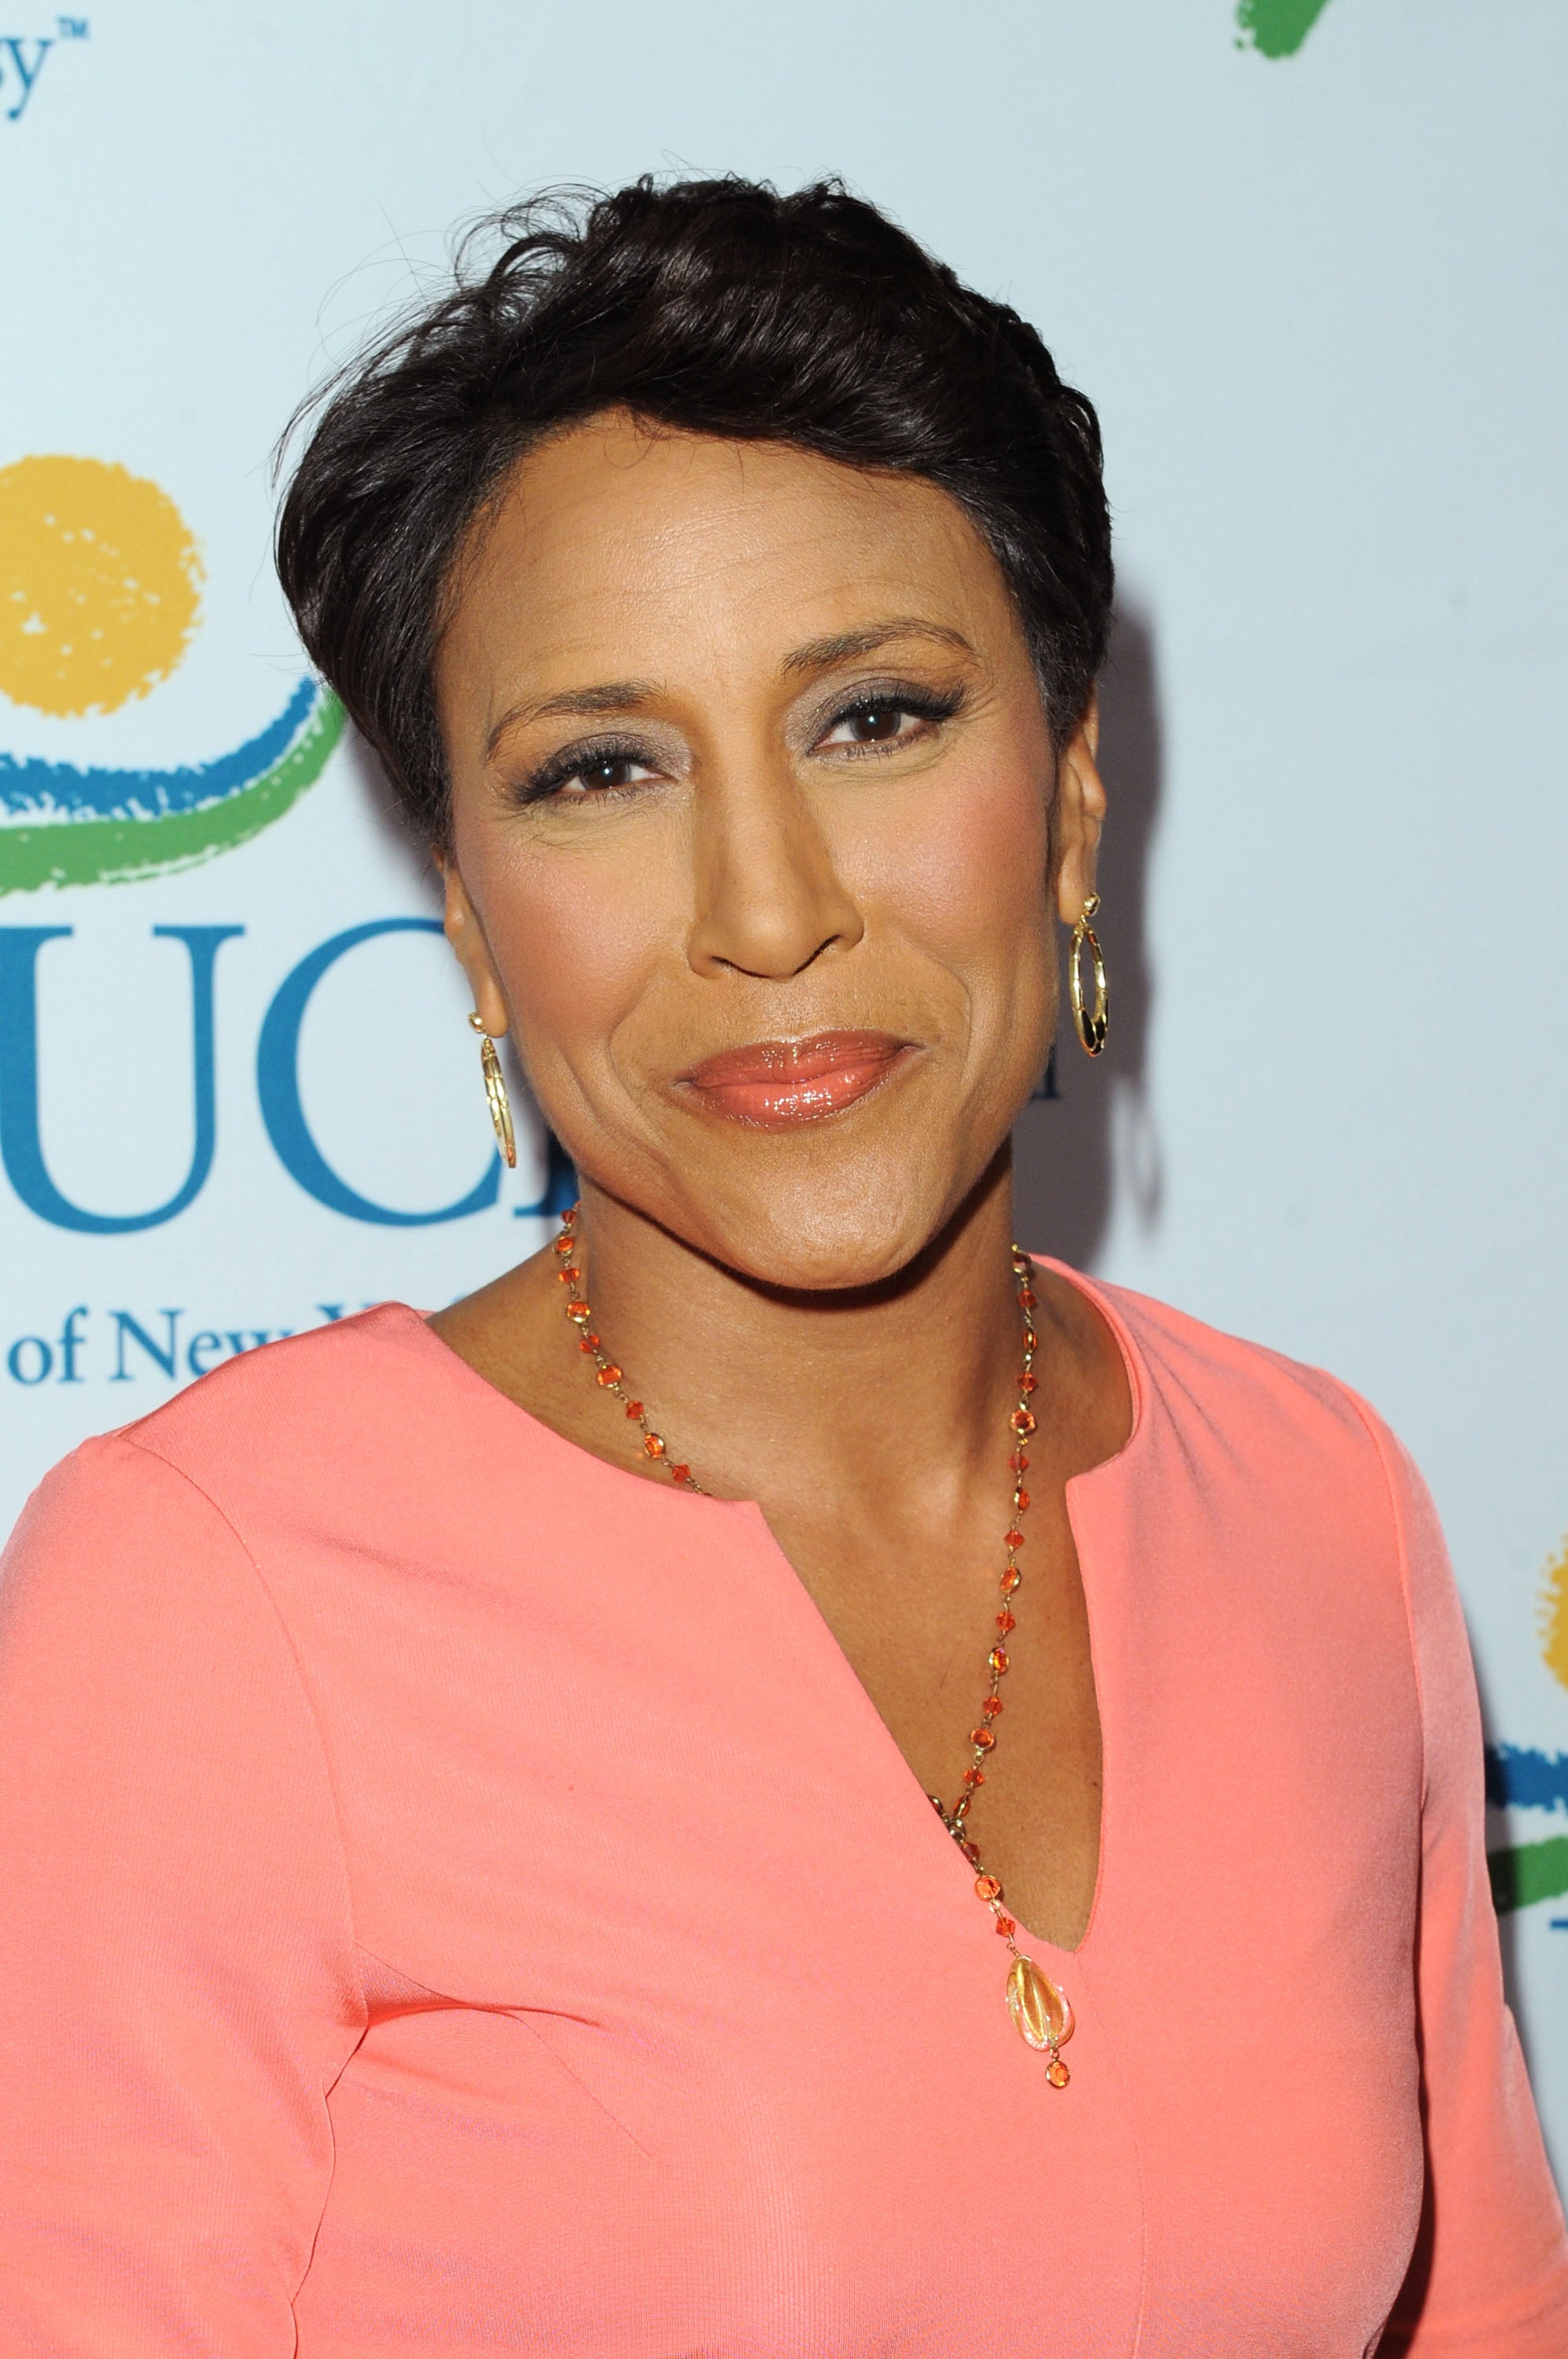 Robin Roberts Plans Medical Leave from ‘Good Morning America’